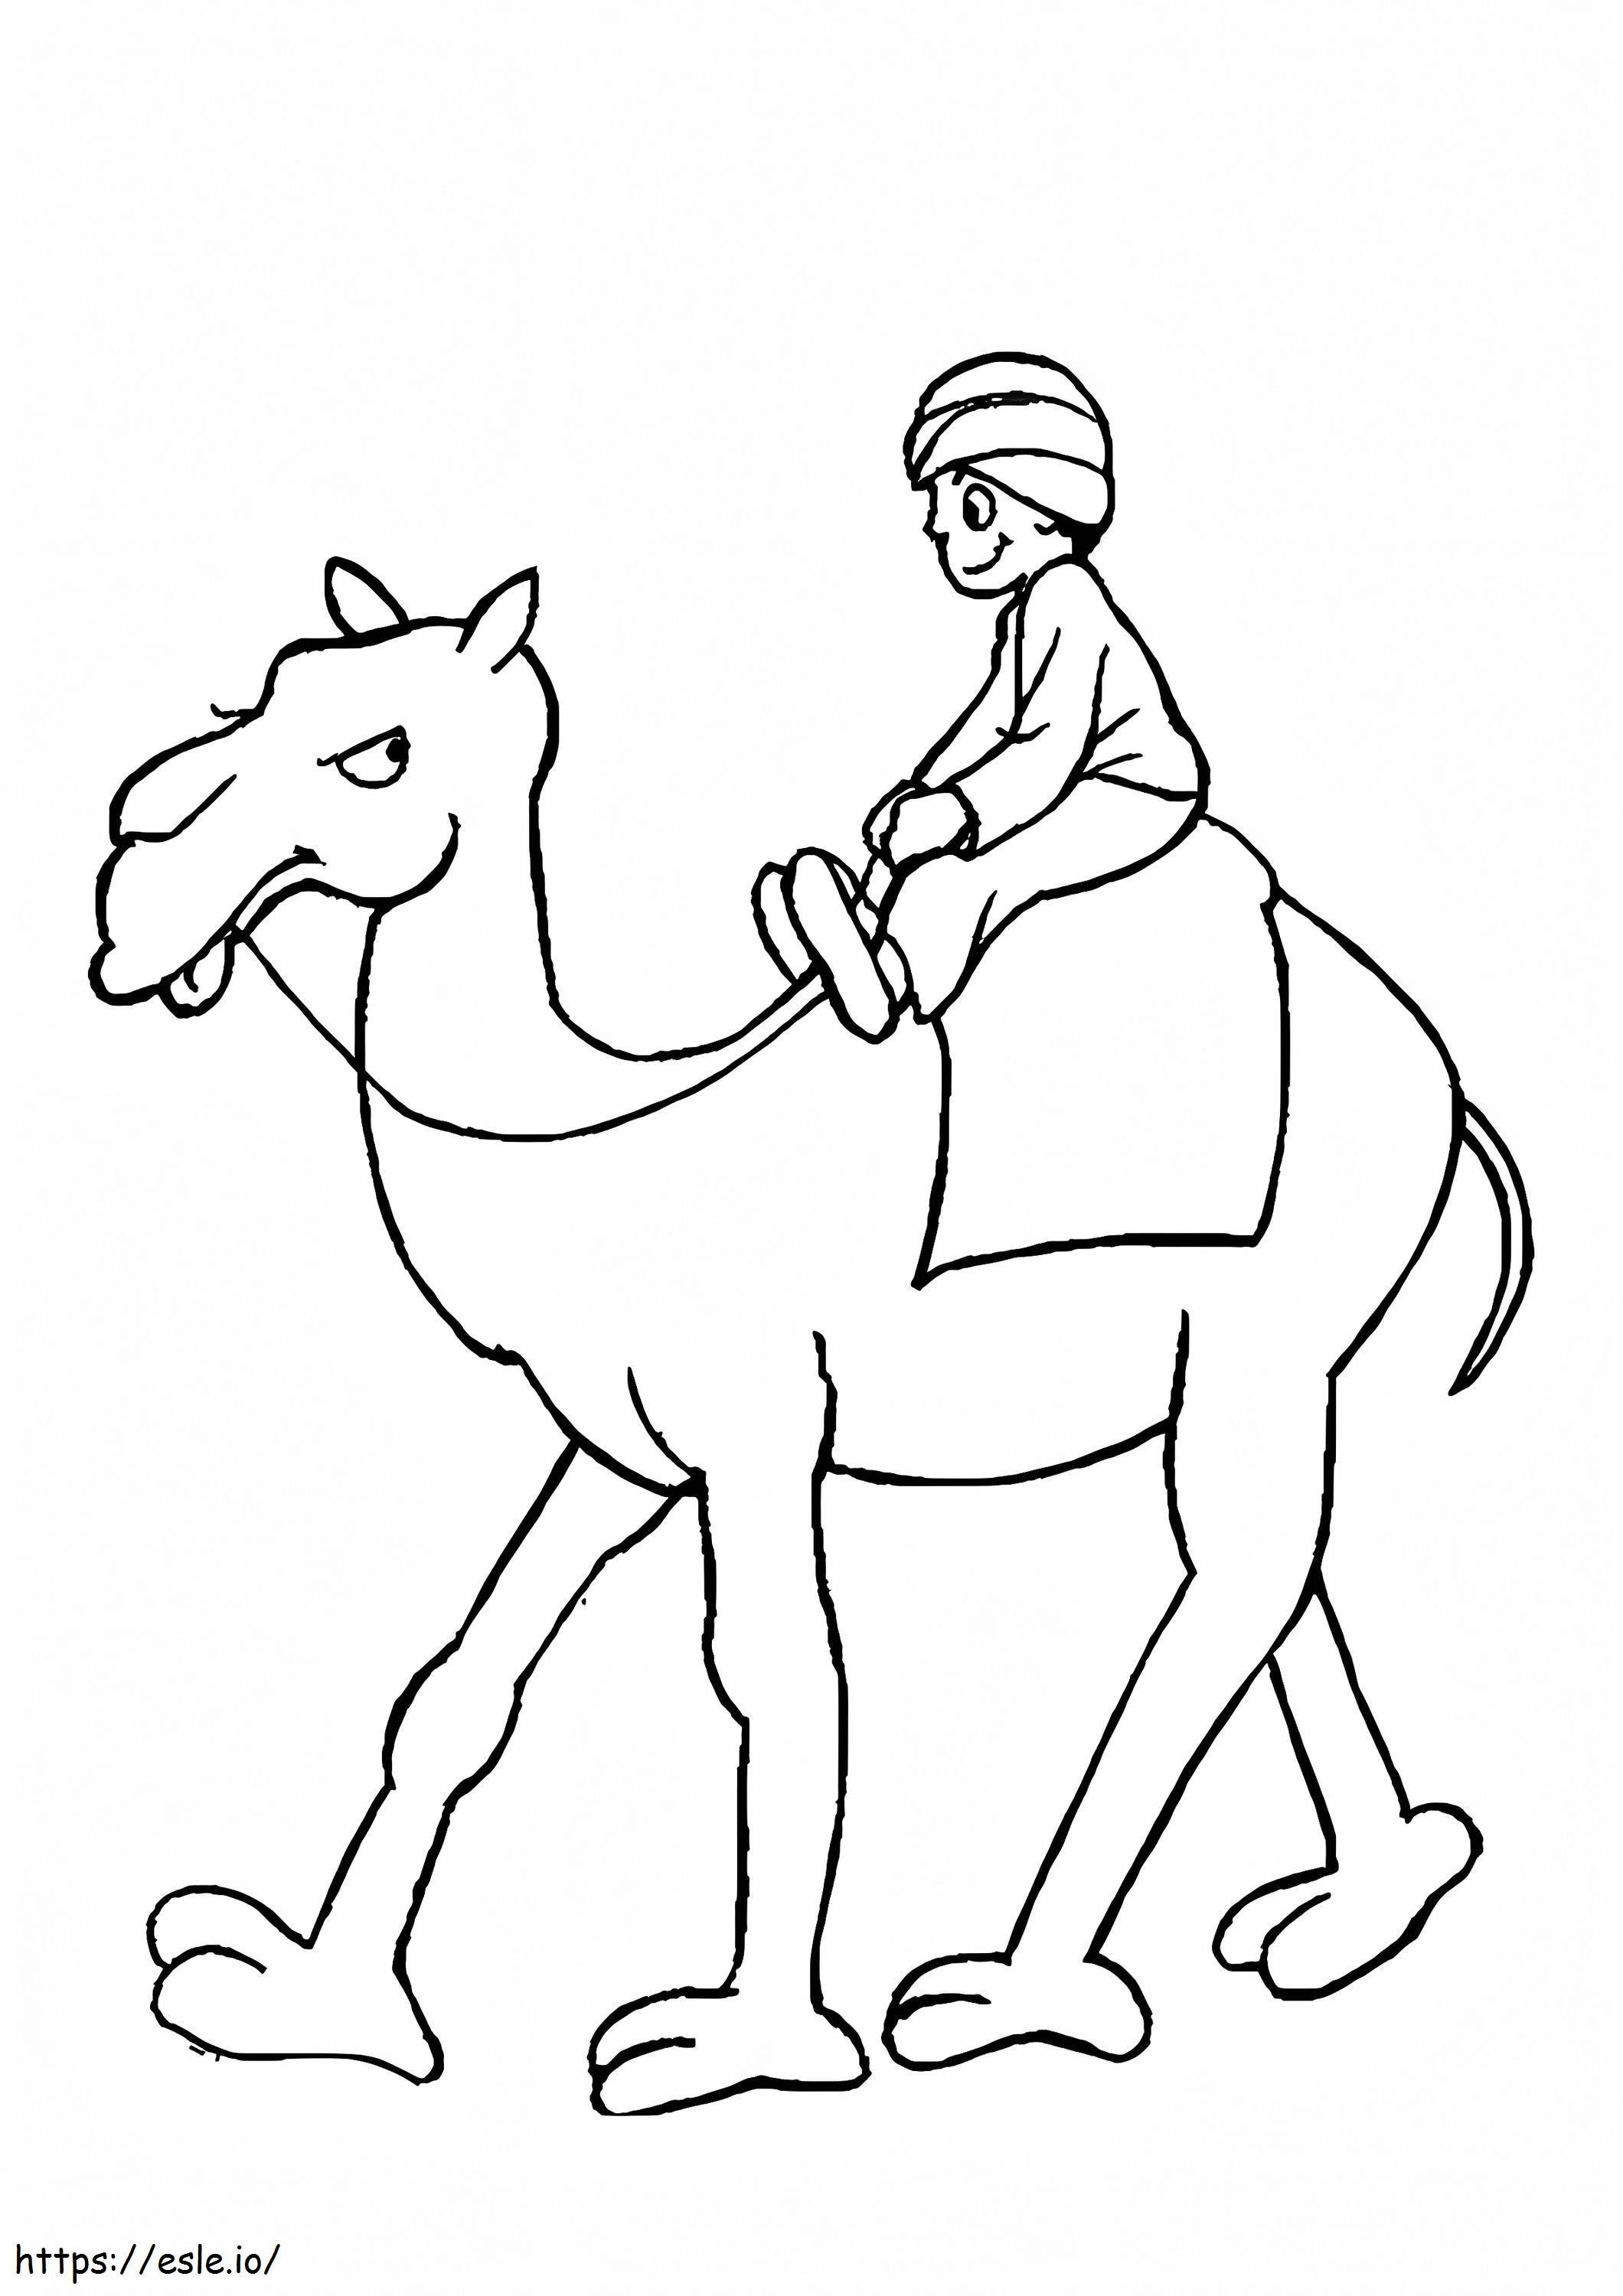 1526463987 The Arabic Man Riding Camel A4 coloring page